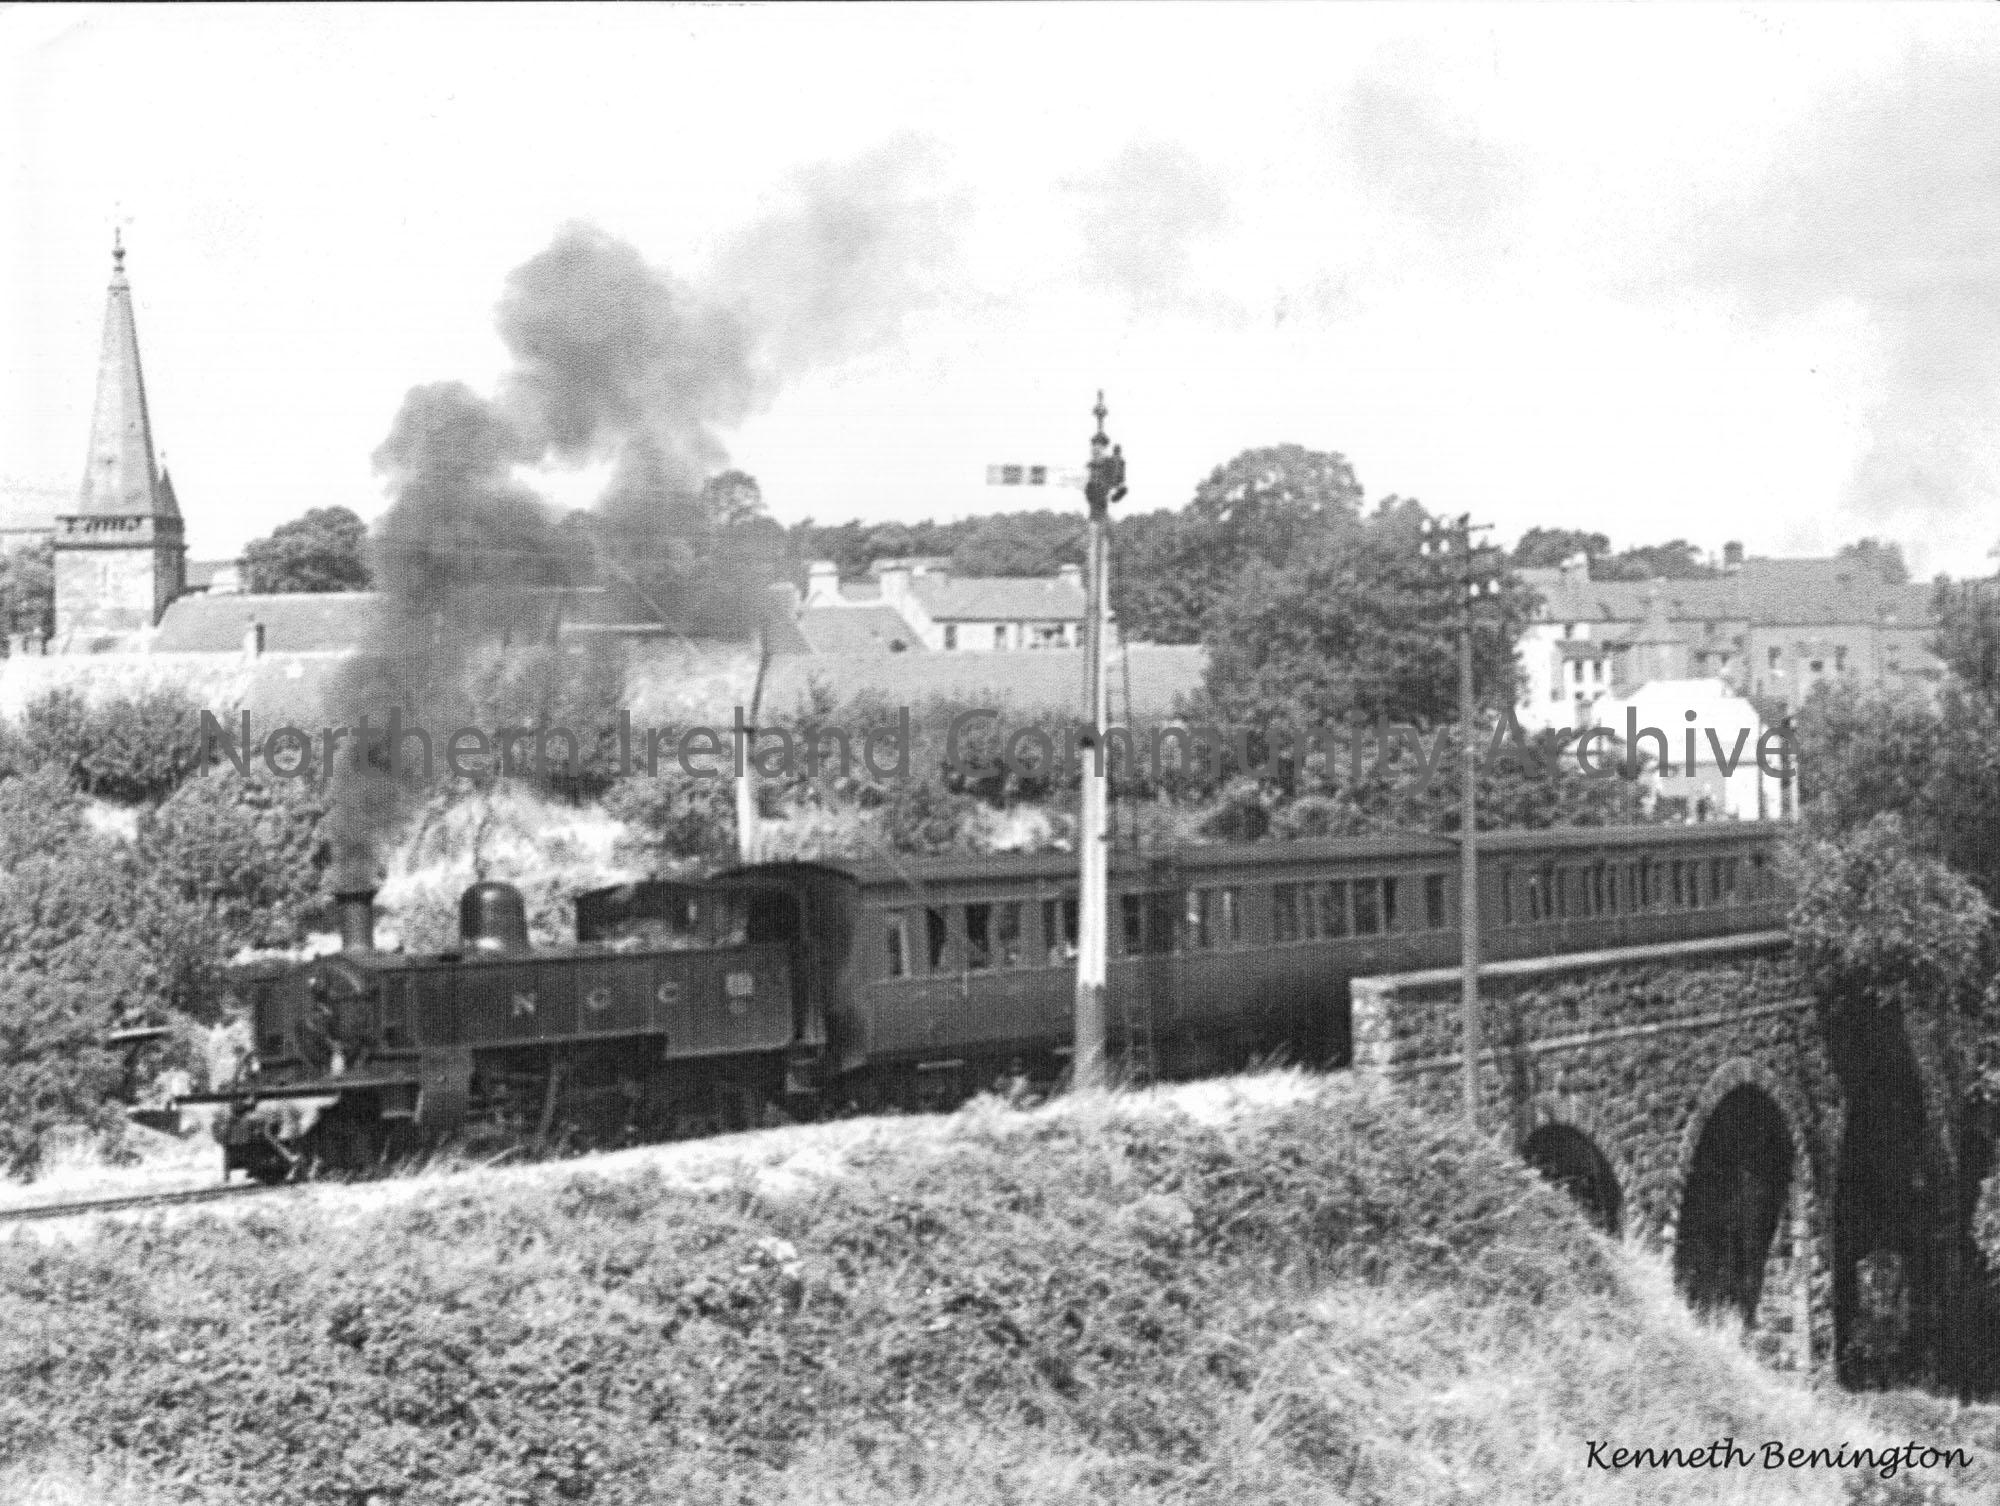 SI class 2-4-2T No.44, in NCC livery, crosses the Tow river shortly after leaving Ballycastle for Ballymoney.